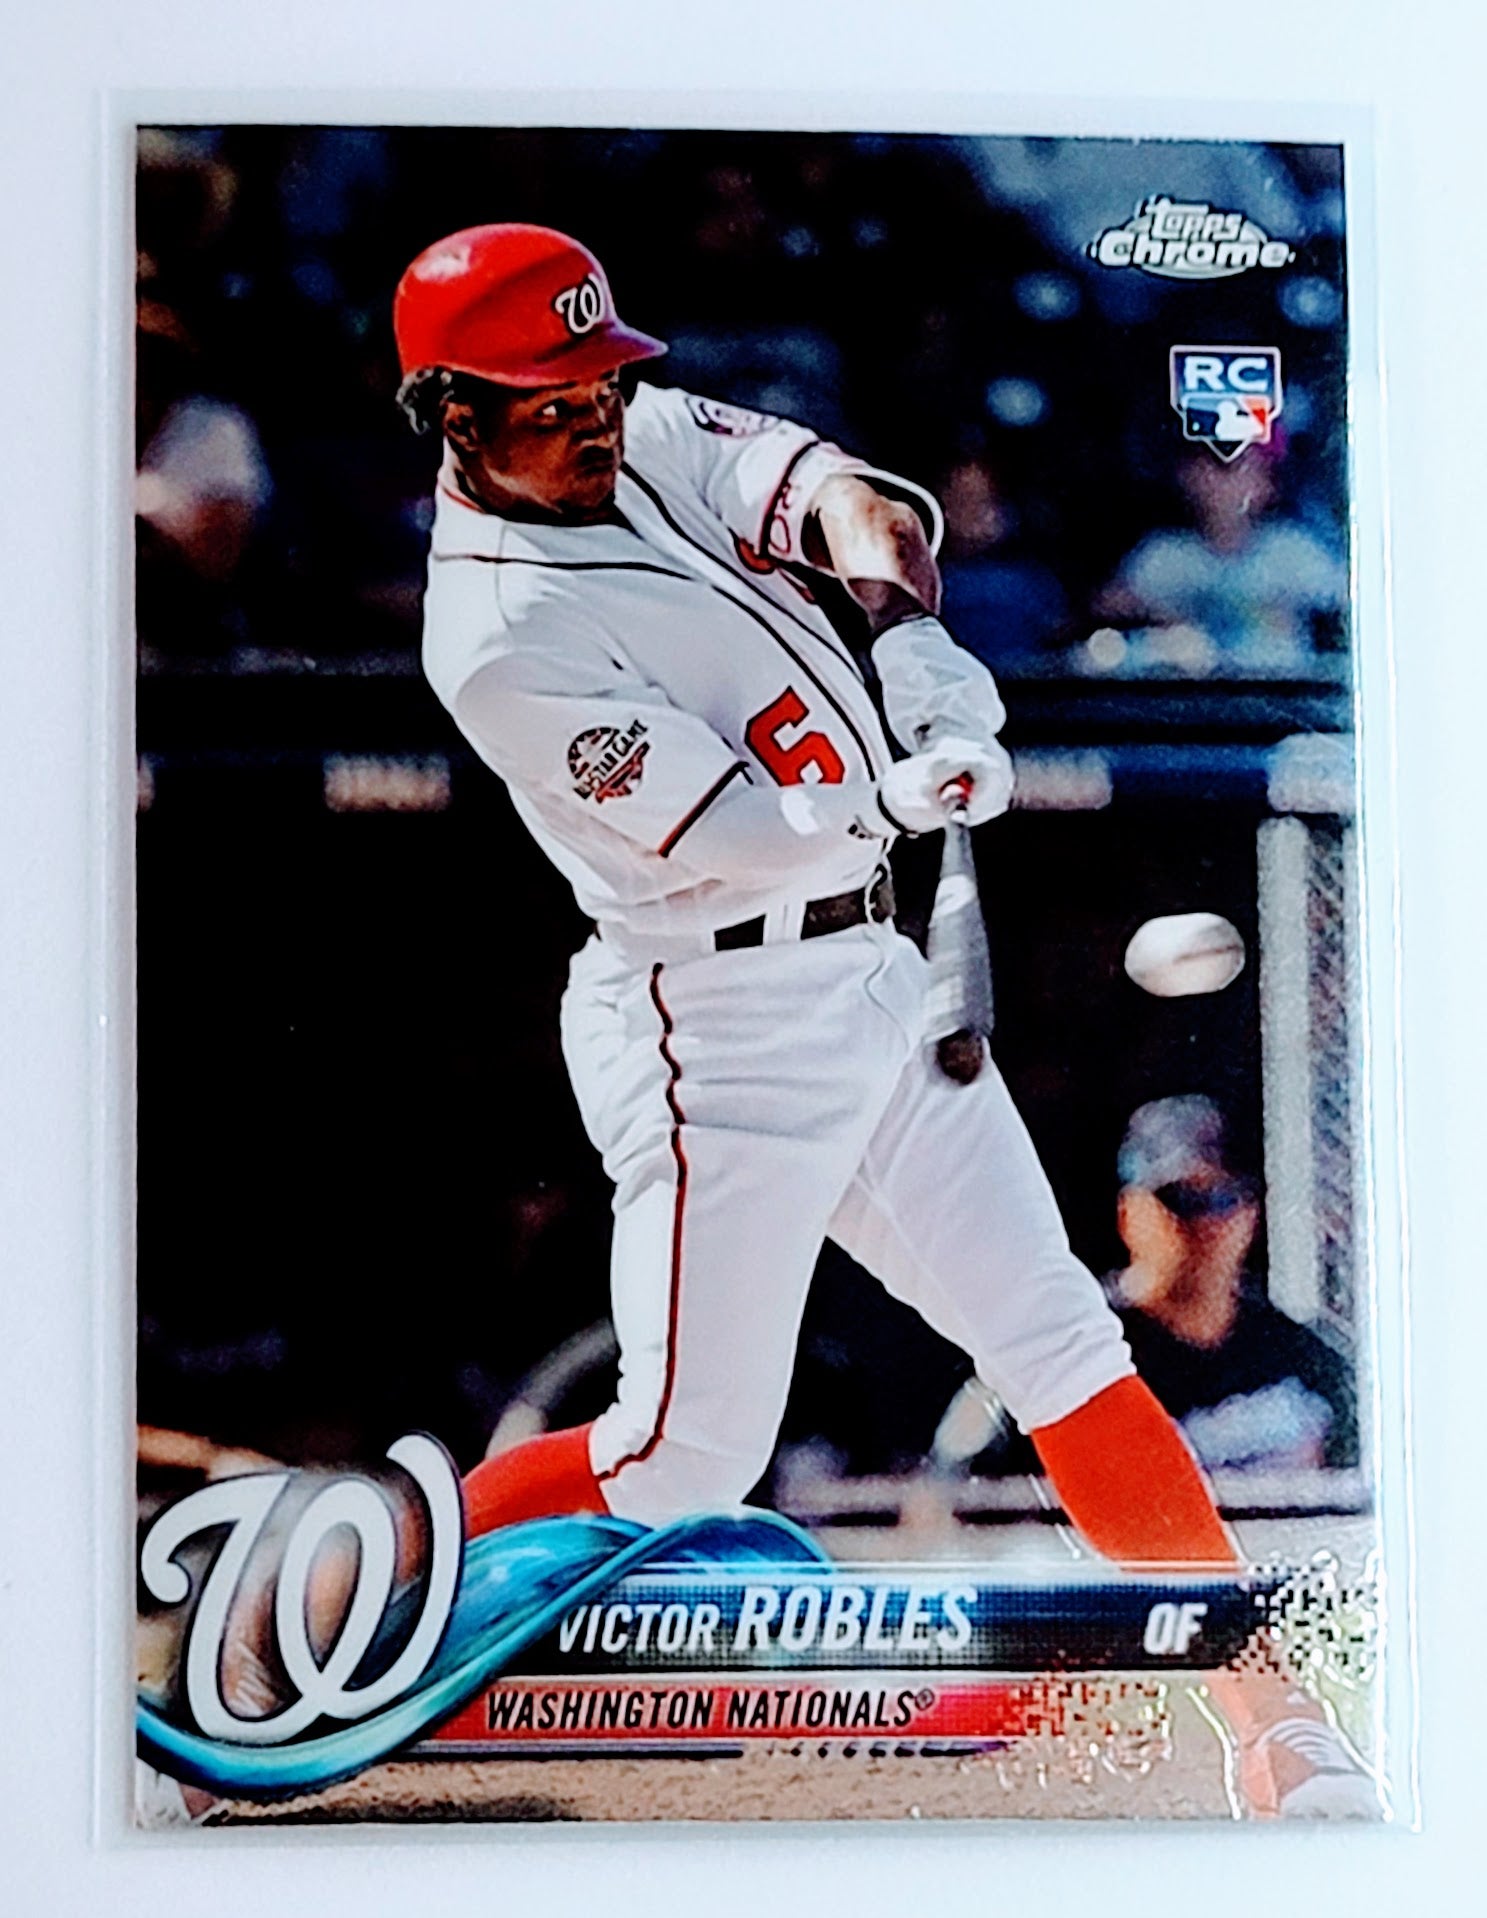 2018 Topps Chrome Update
  Edition Victor Robles   RC Baseball
  Card  TH13C simple Xclusive Collectibles   